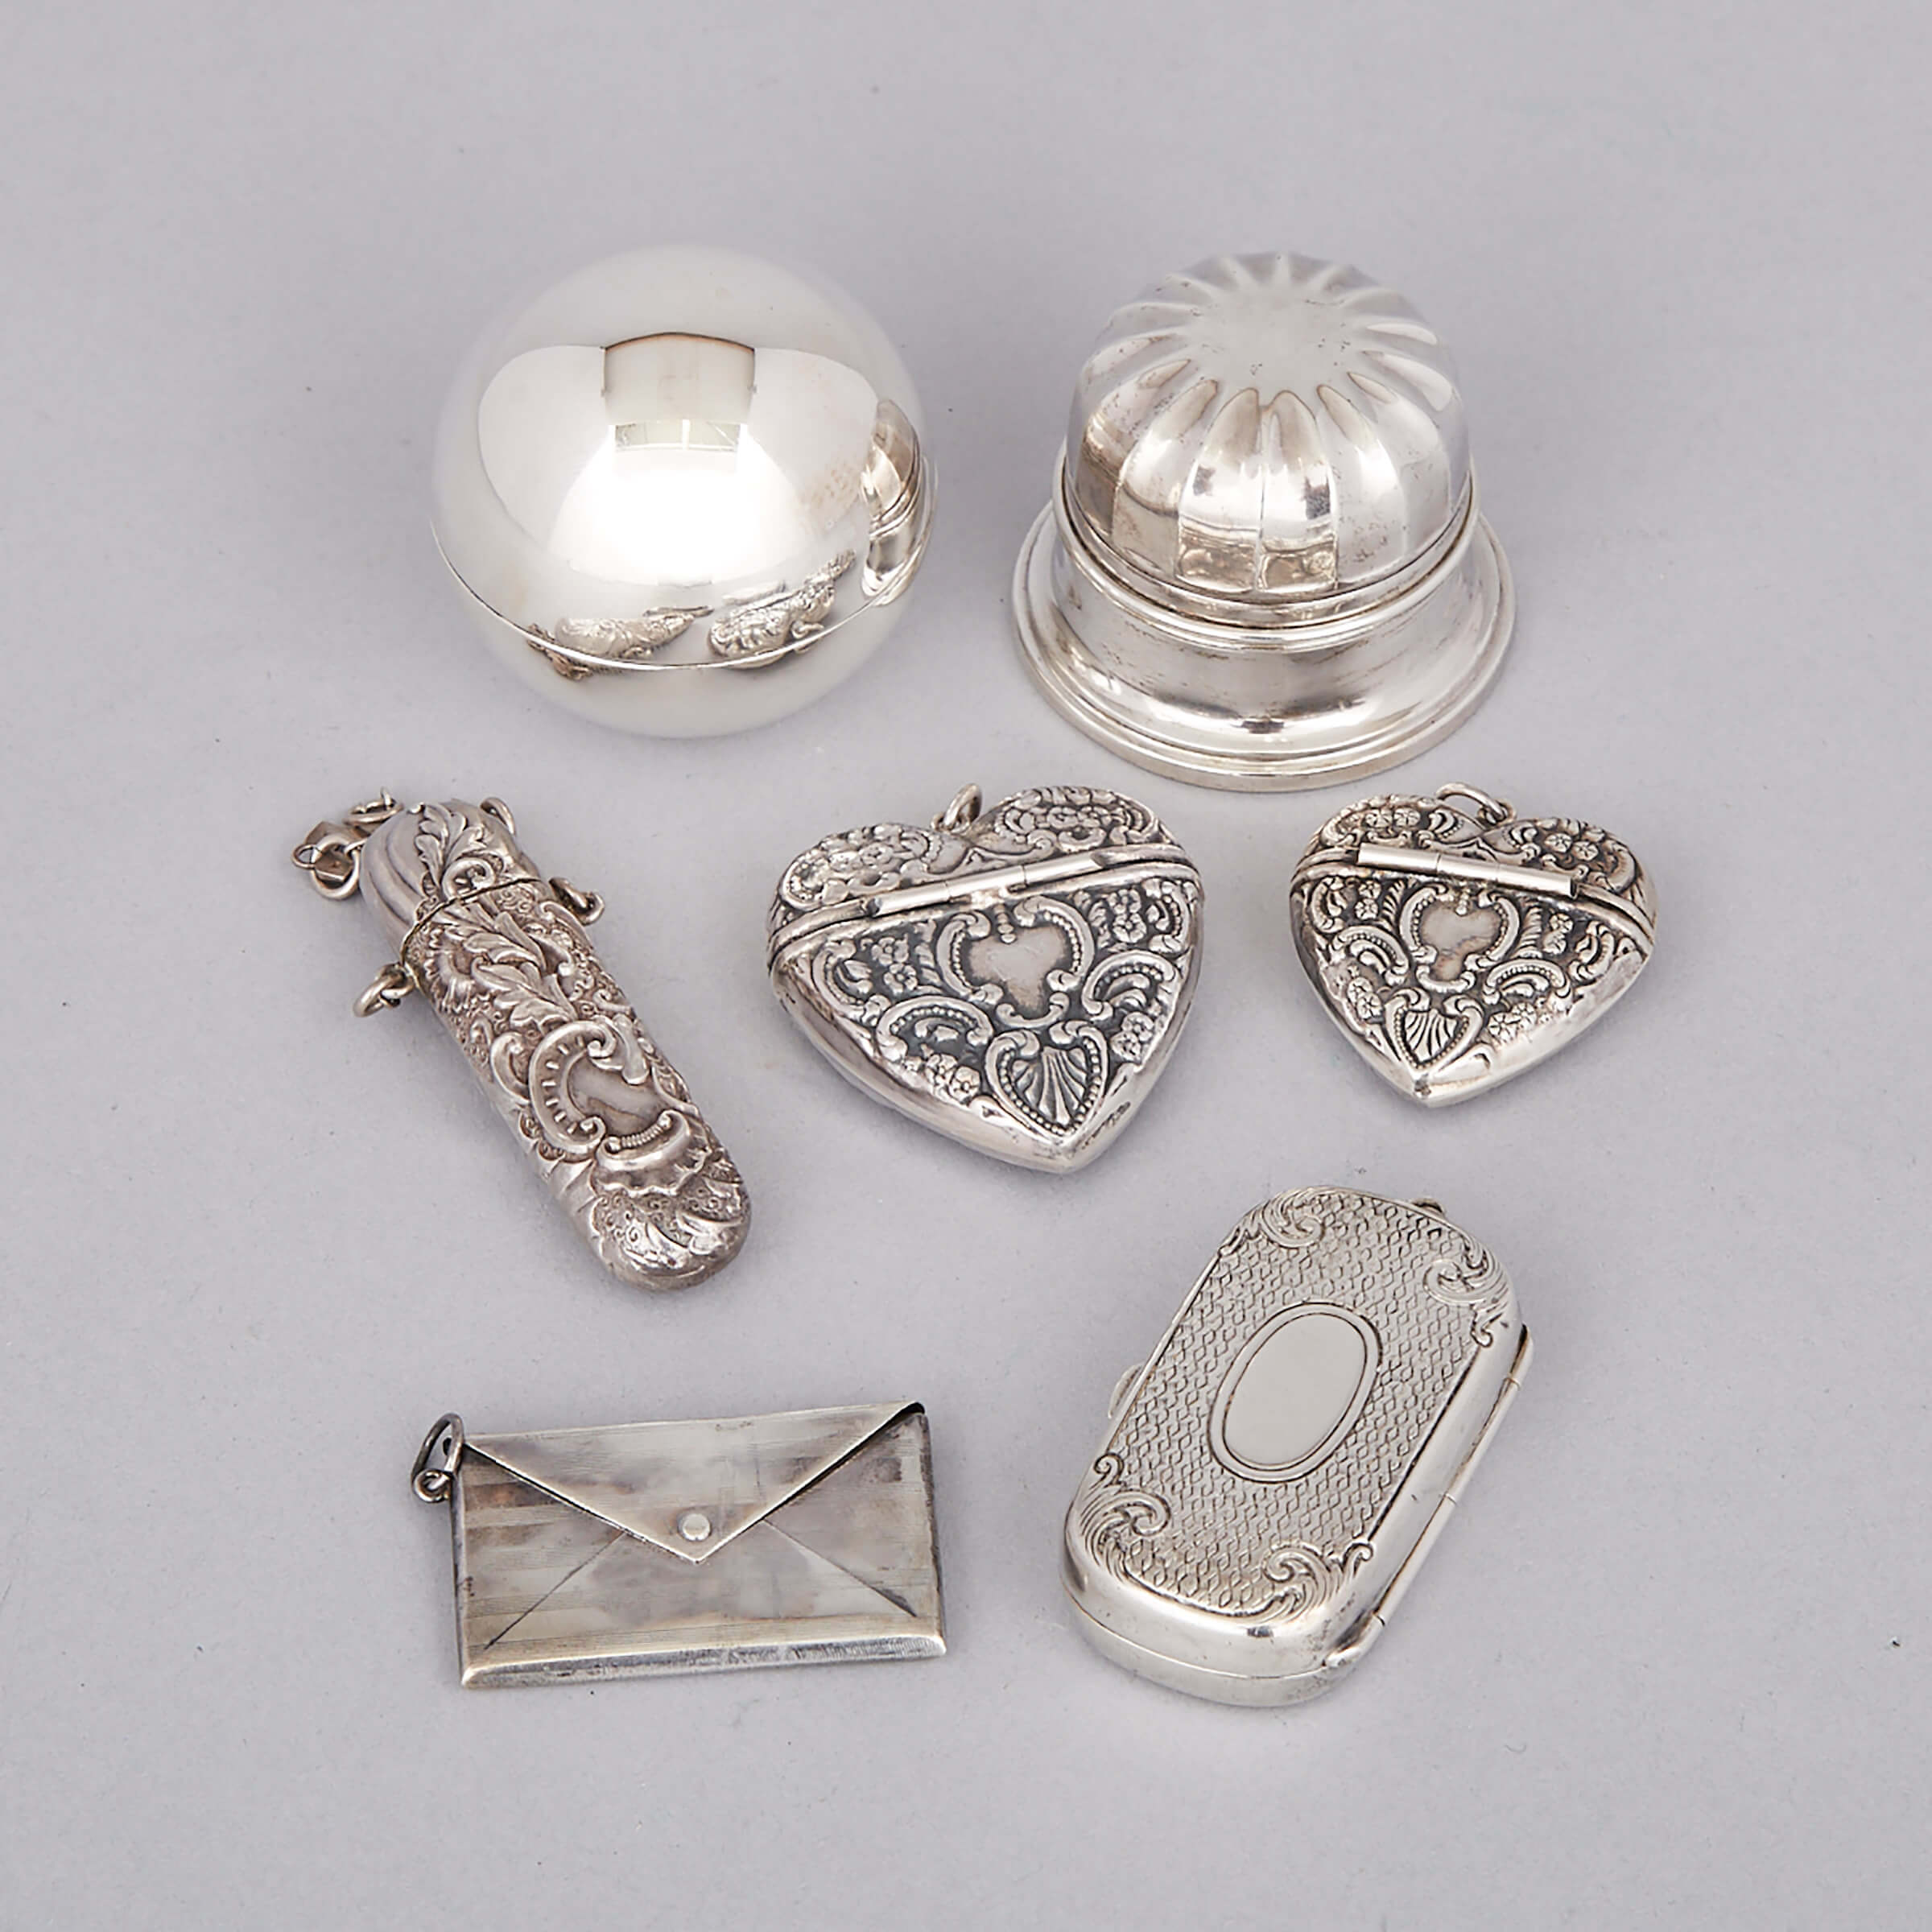 Two North American Silver Heart Shaped Small Boxes, Coin Case, Stamp Case, Two Ring Boxes and a Victorian Needle Case, late 19th/20th century